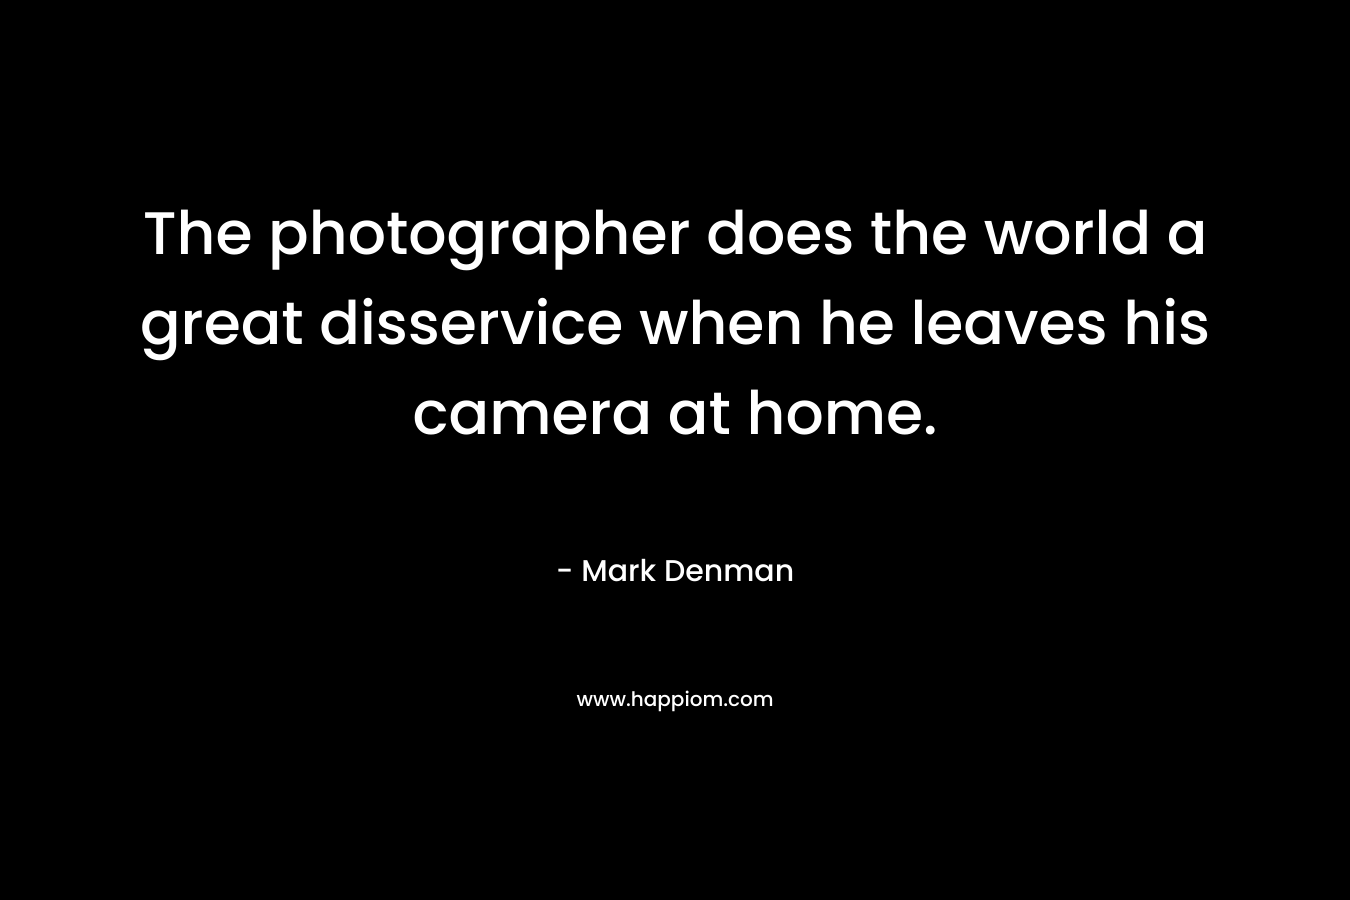 The photographer does the world a great disservice when he leaves his camera at home. – Mark Denman